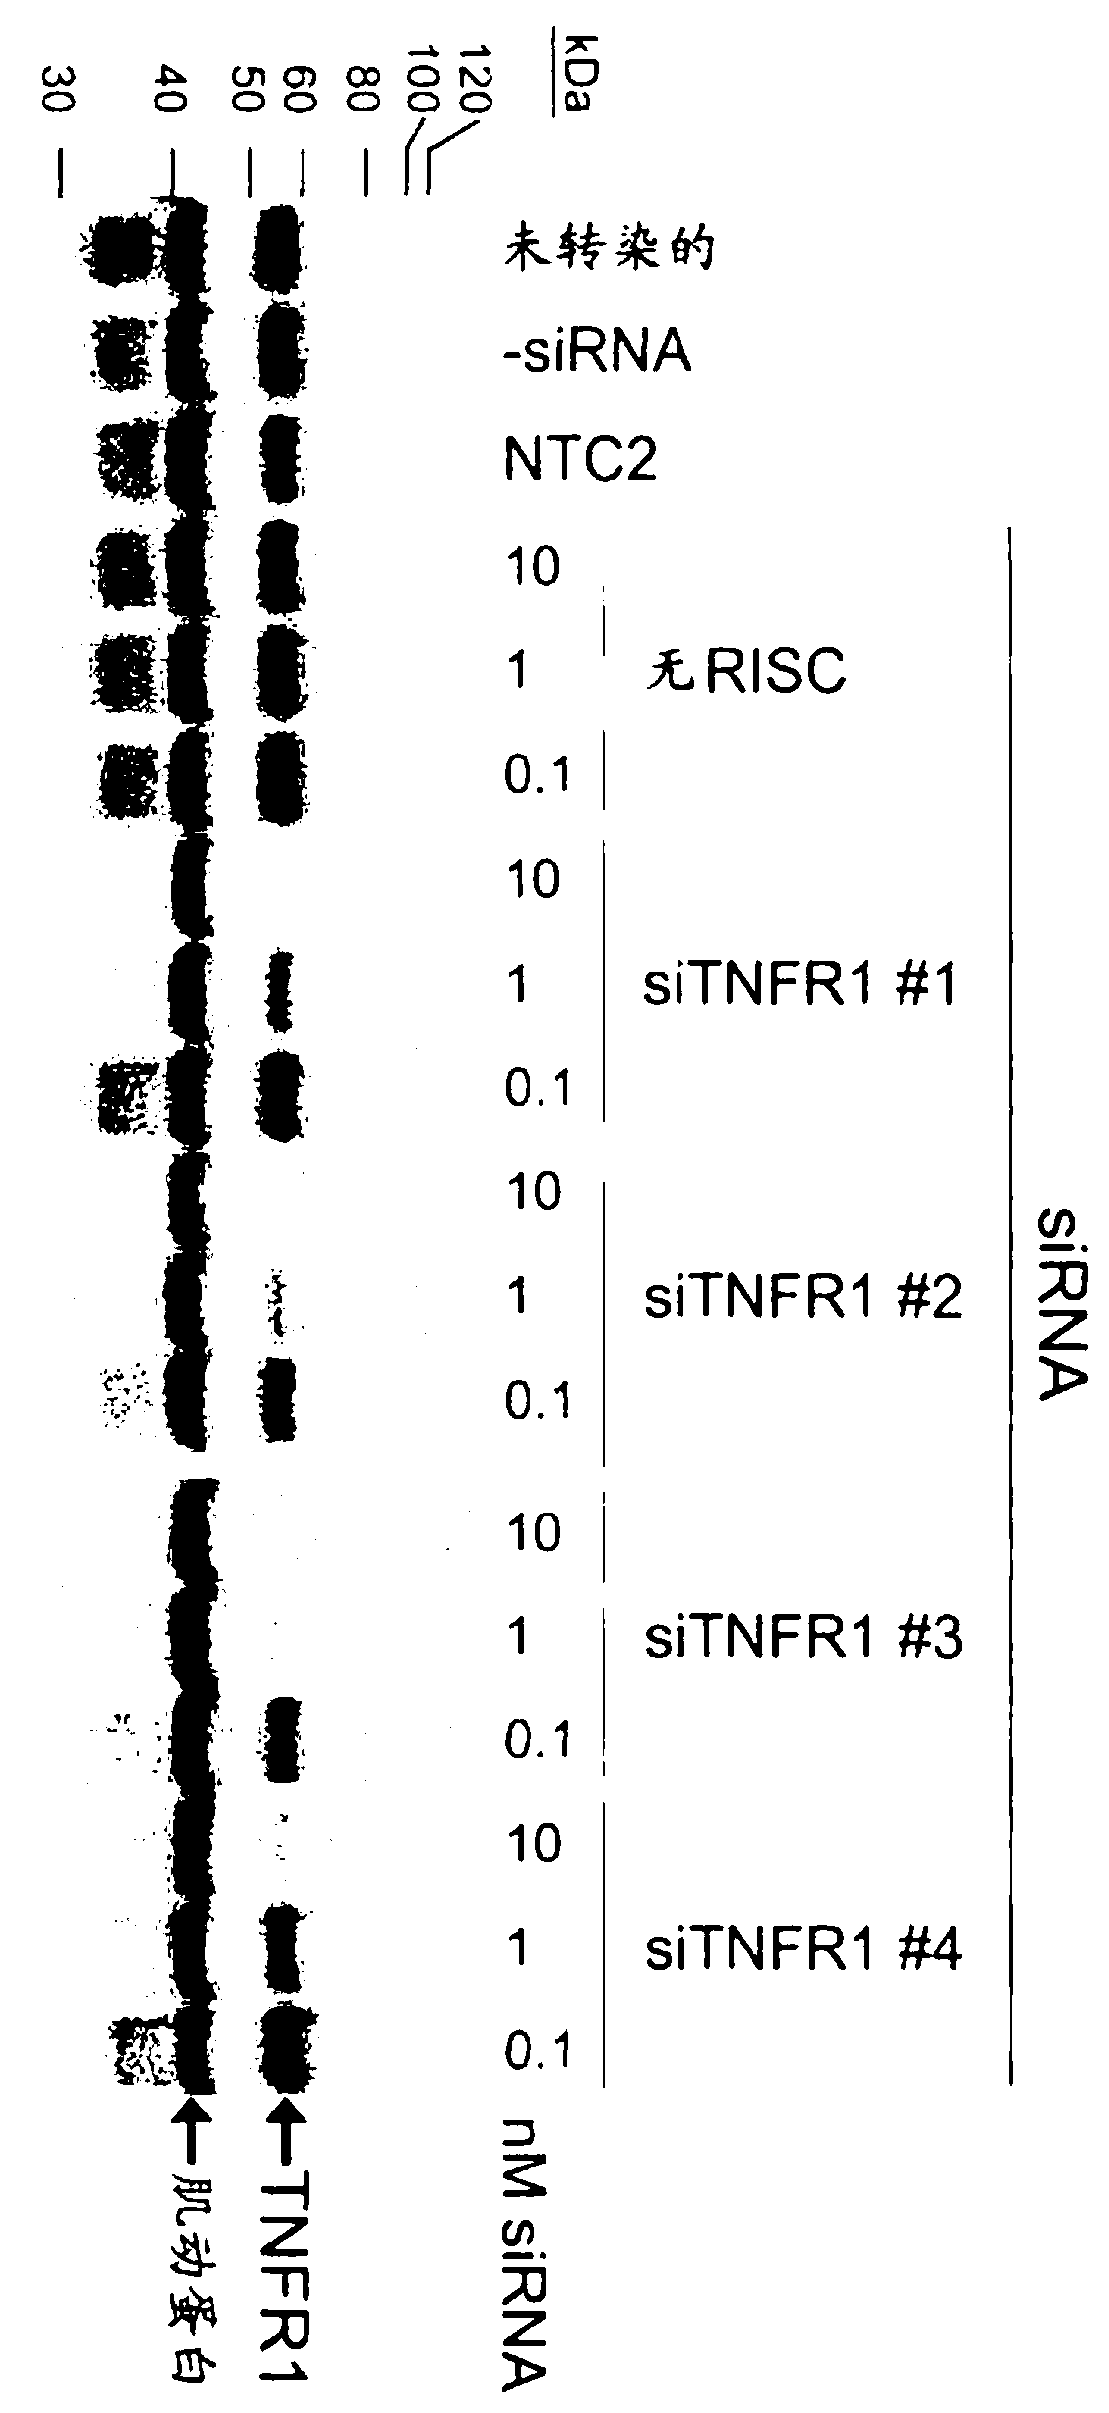 RNAi-mediated inhibition of tumor necrosis factor alpha-related conditions